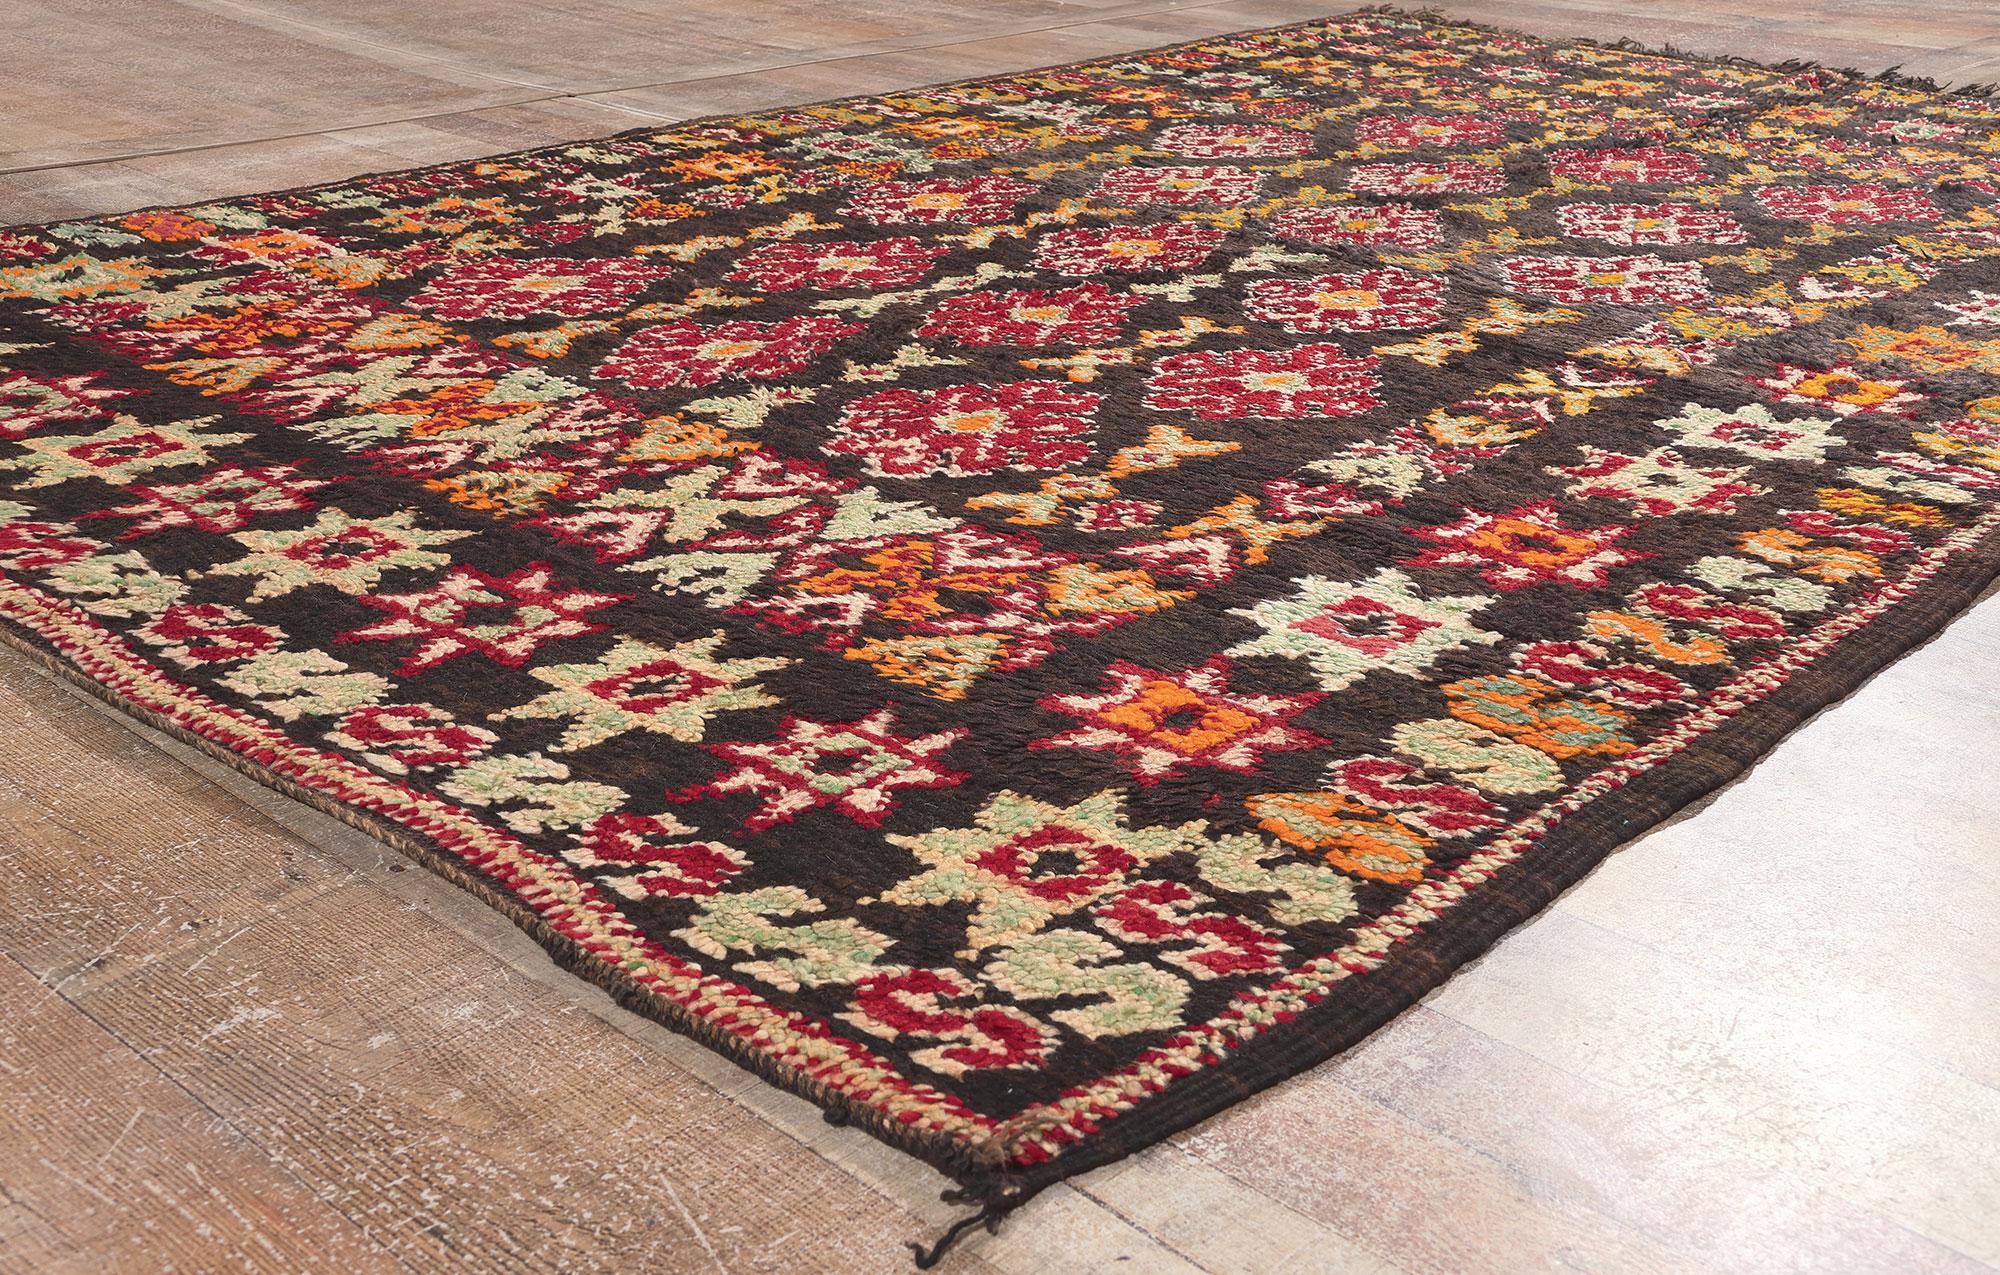 20th Century Vintage Beni MGuild Moroccan Rug , Tribal Enchantment Meets Midcentury Modern For Sale